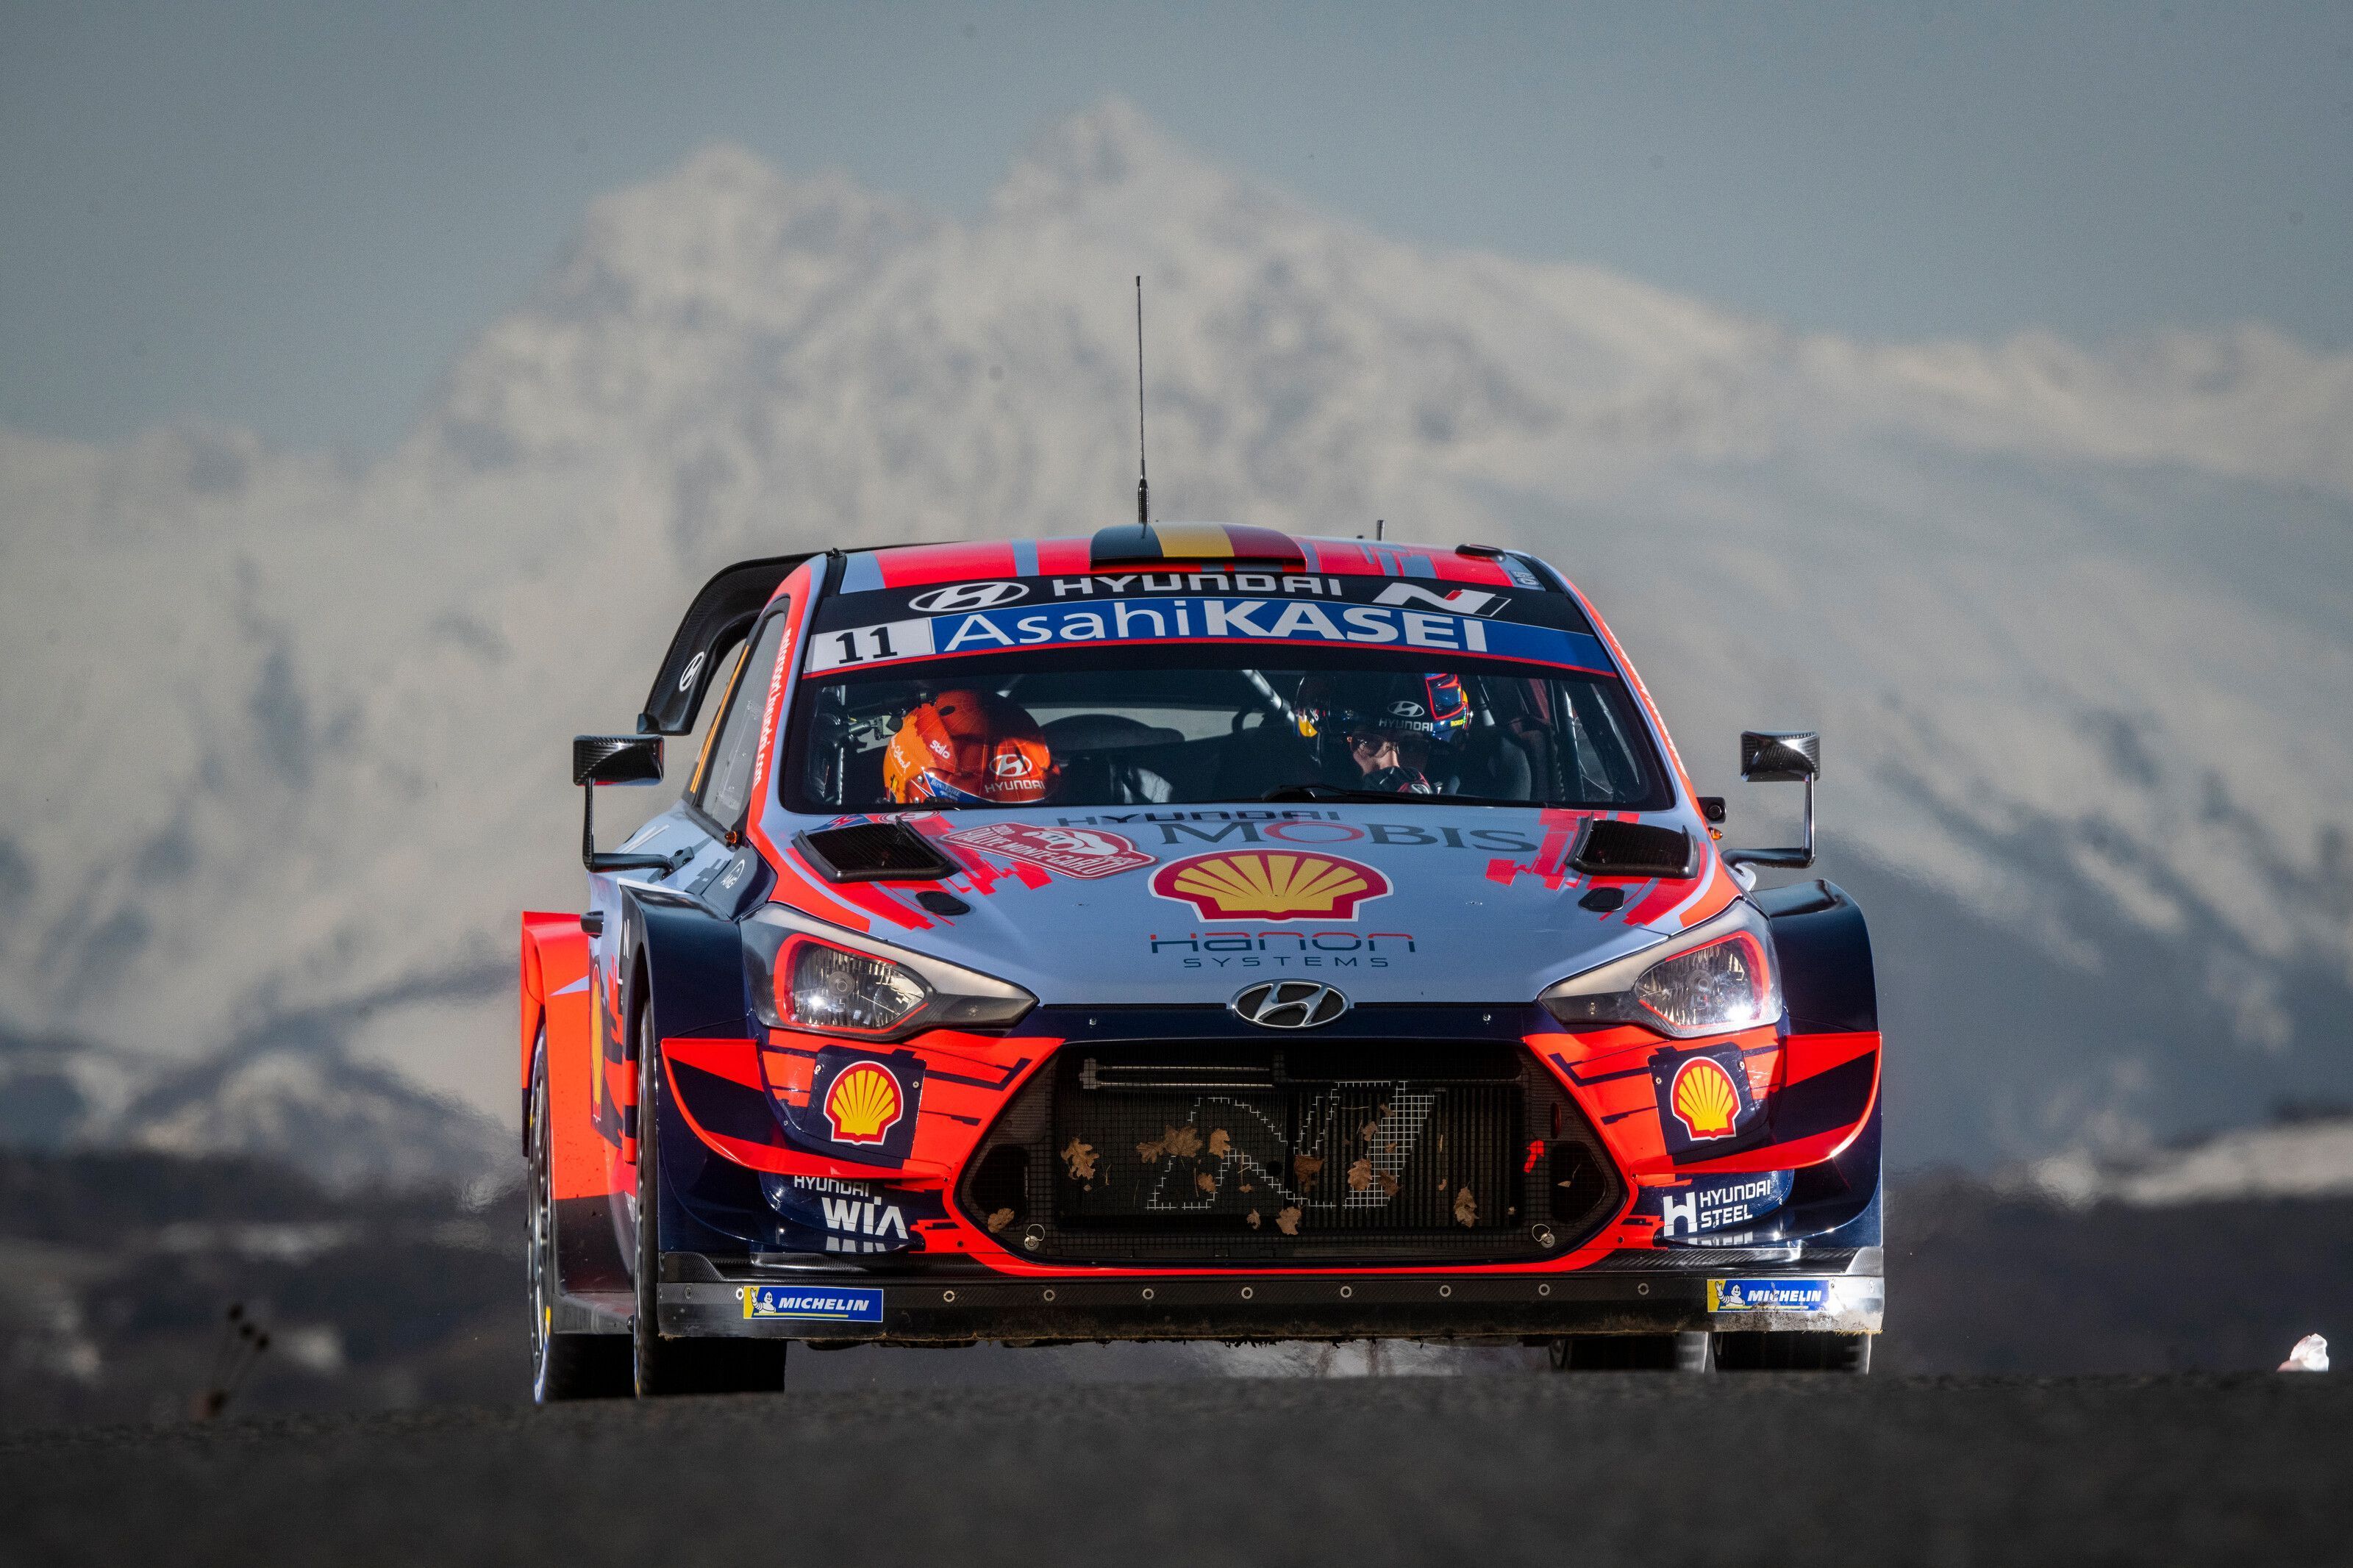 Thierry Neuville, WRC